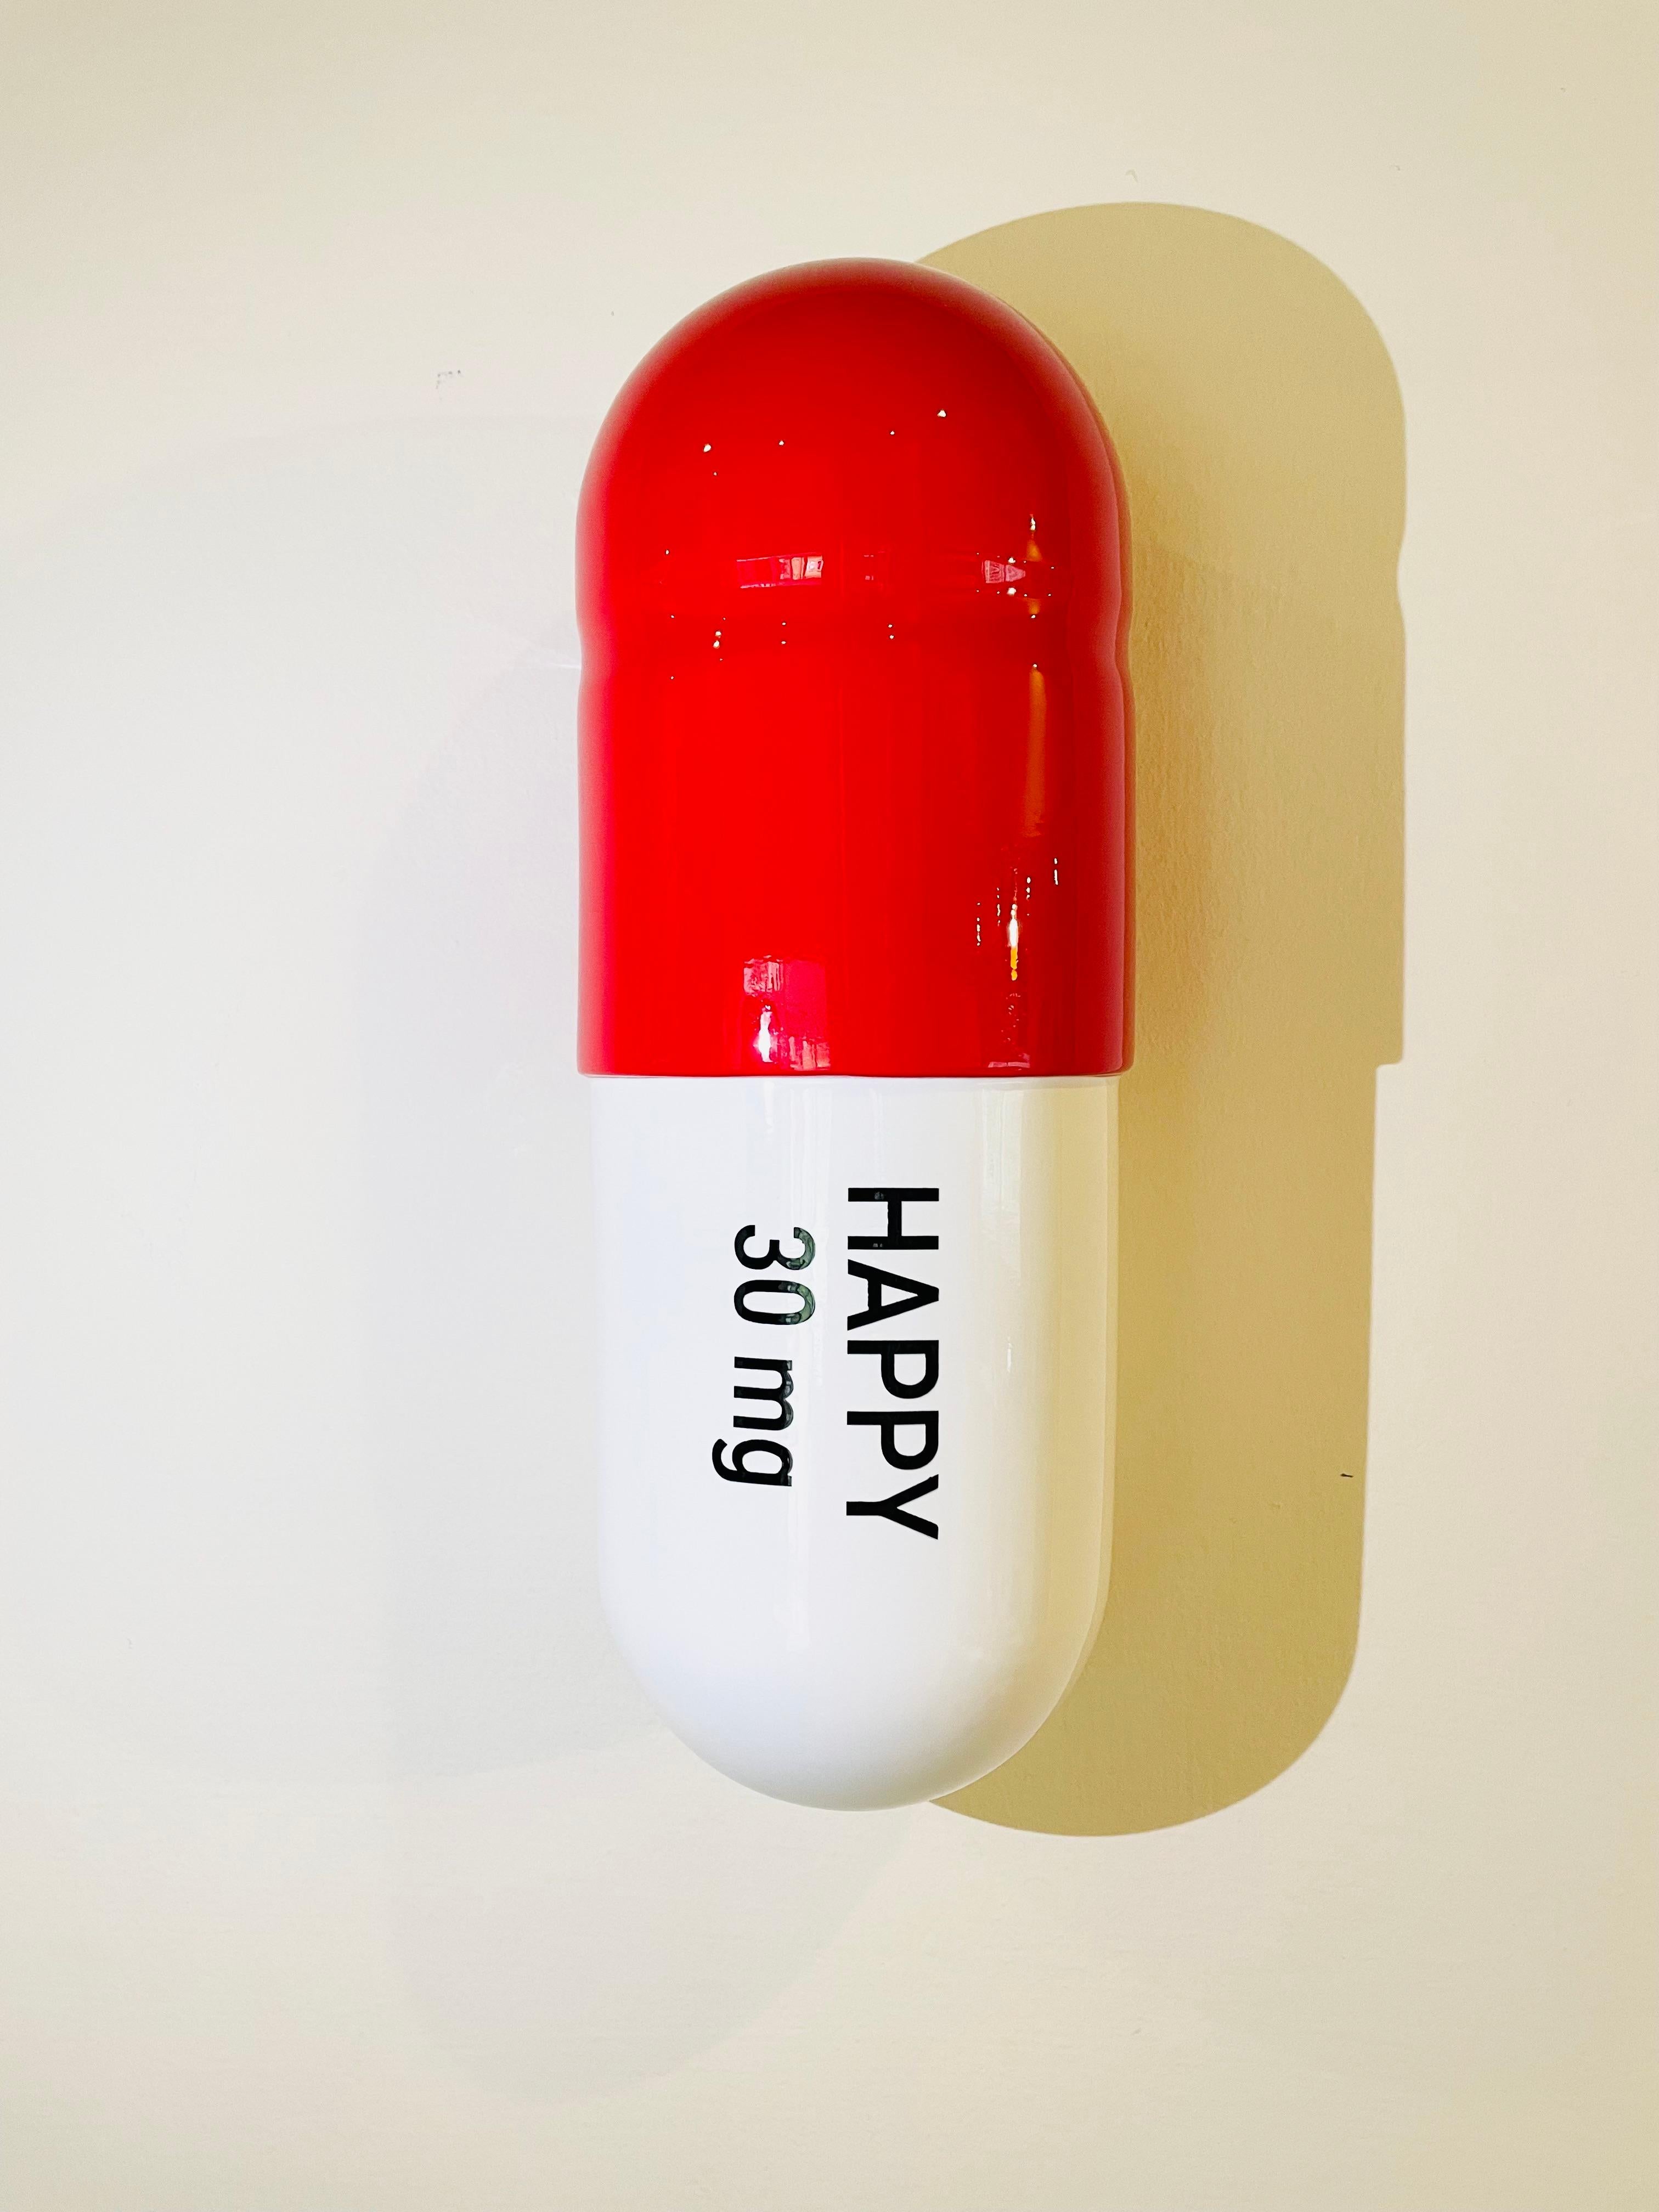 30 mg Large Happy pill (Red and red) - figurative sculpture